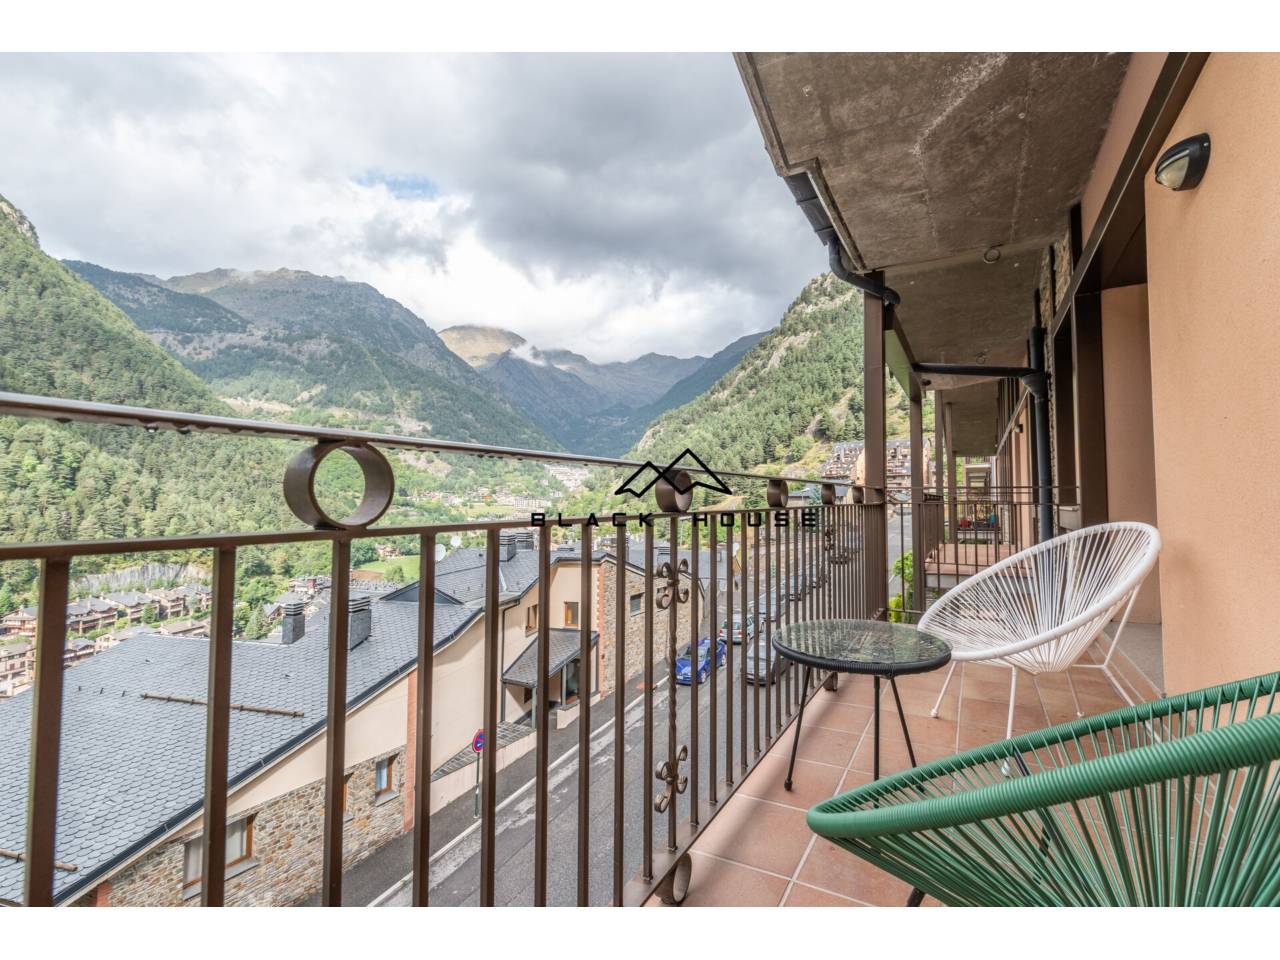 For sale fabulous apartment equipped and furnished in Arinsal.